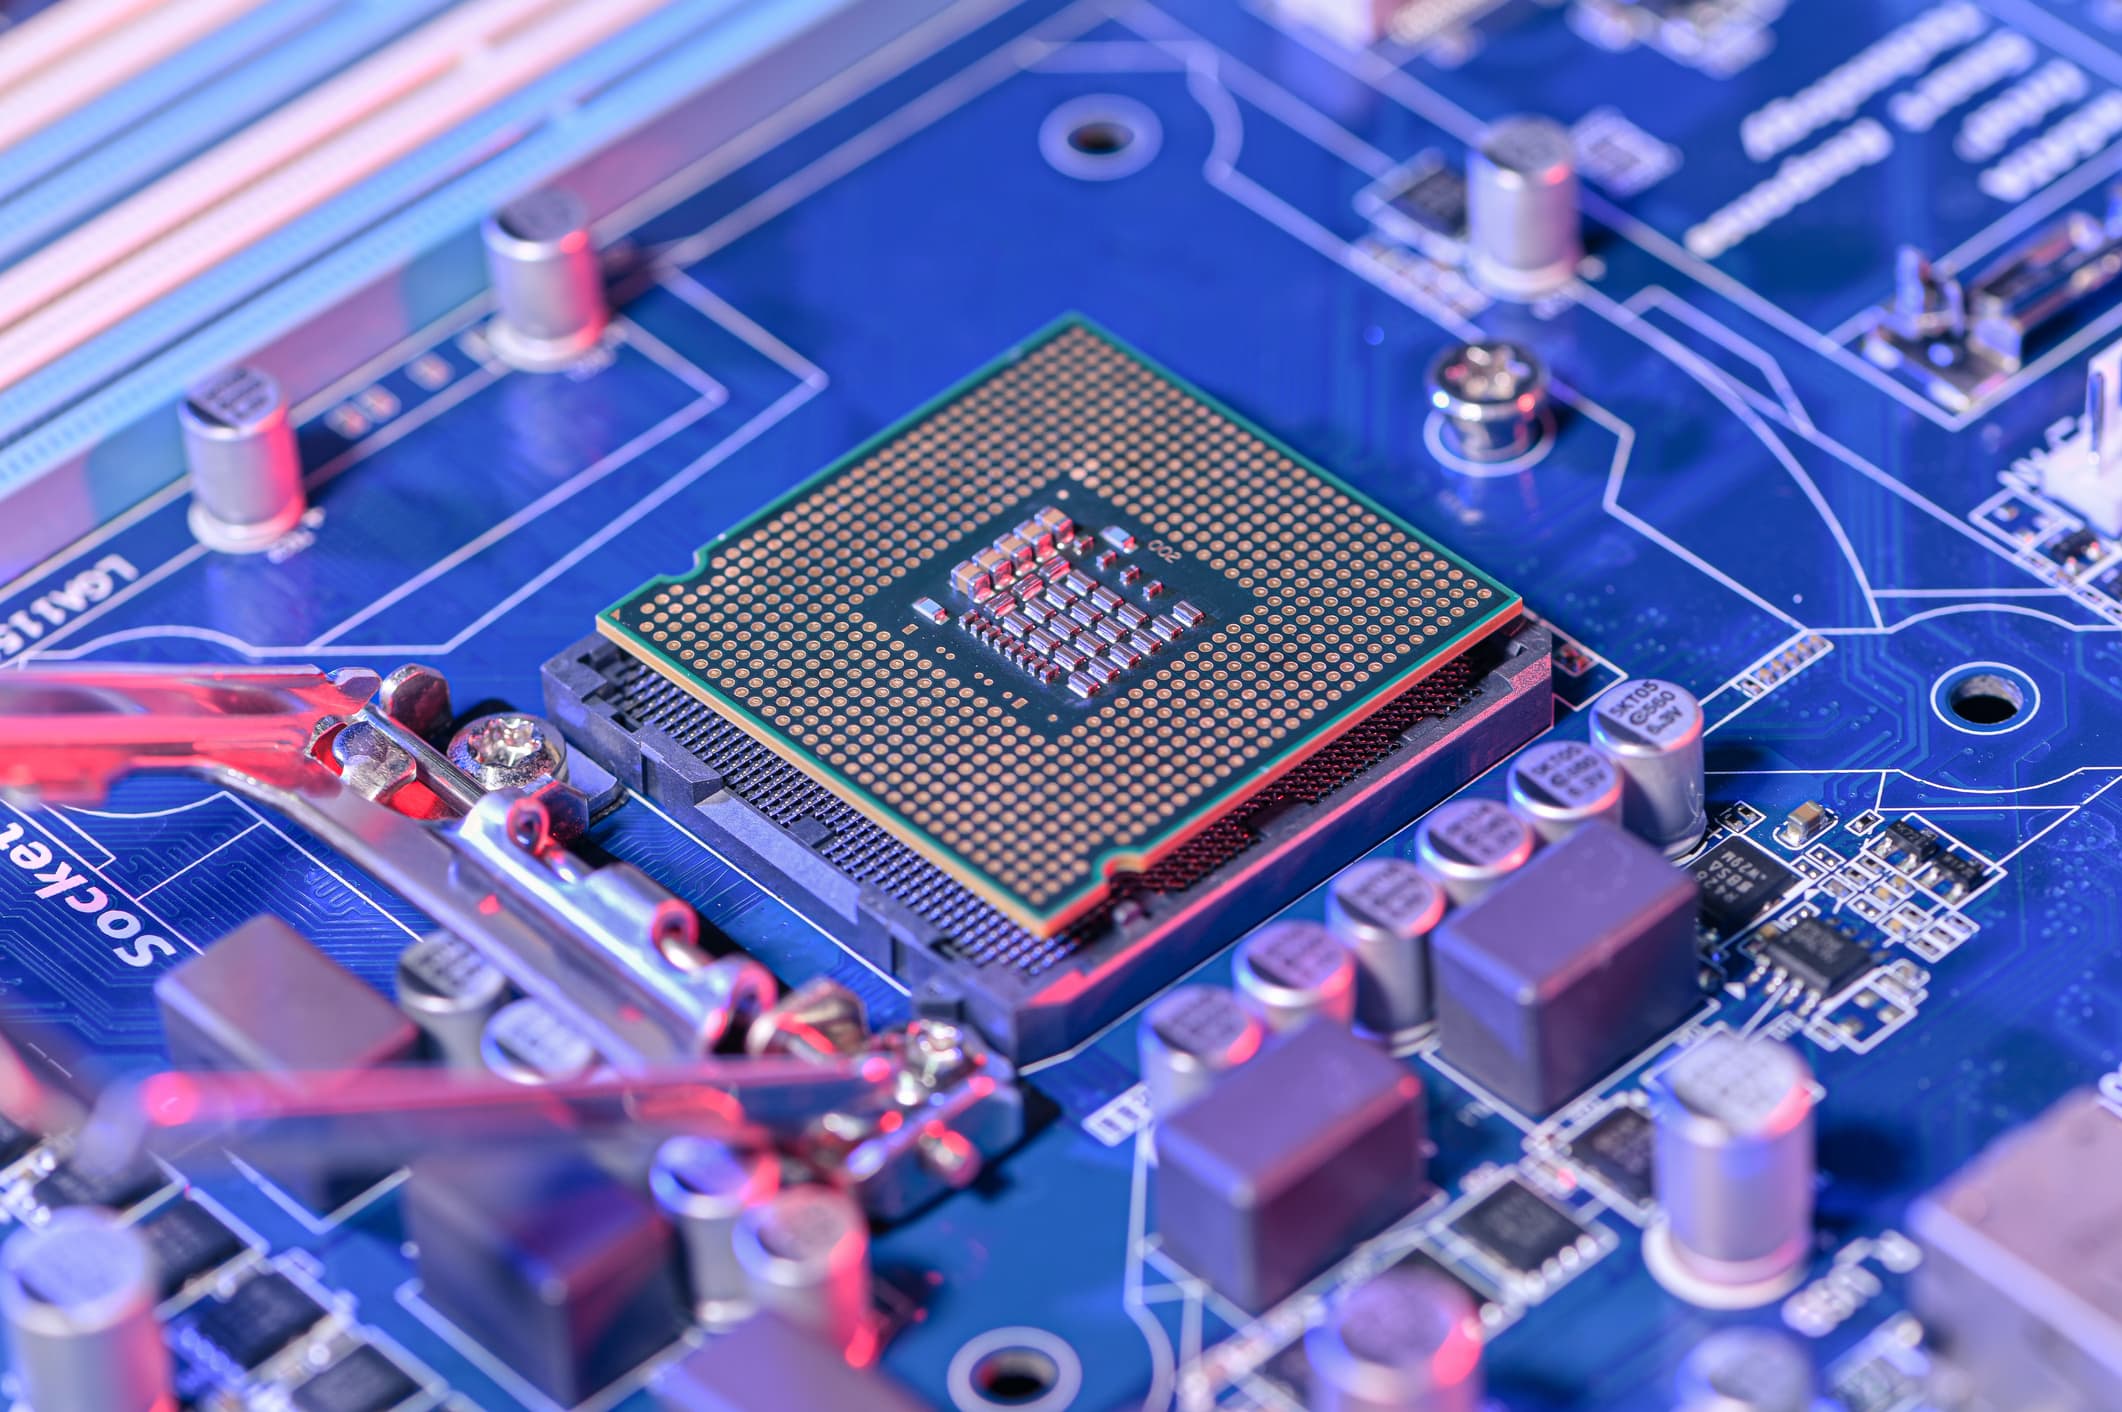 The global chip shortage doesn’t mean all semiconductor prices will shoot up equally, says Natixis chief economist